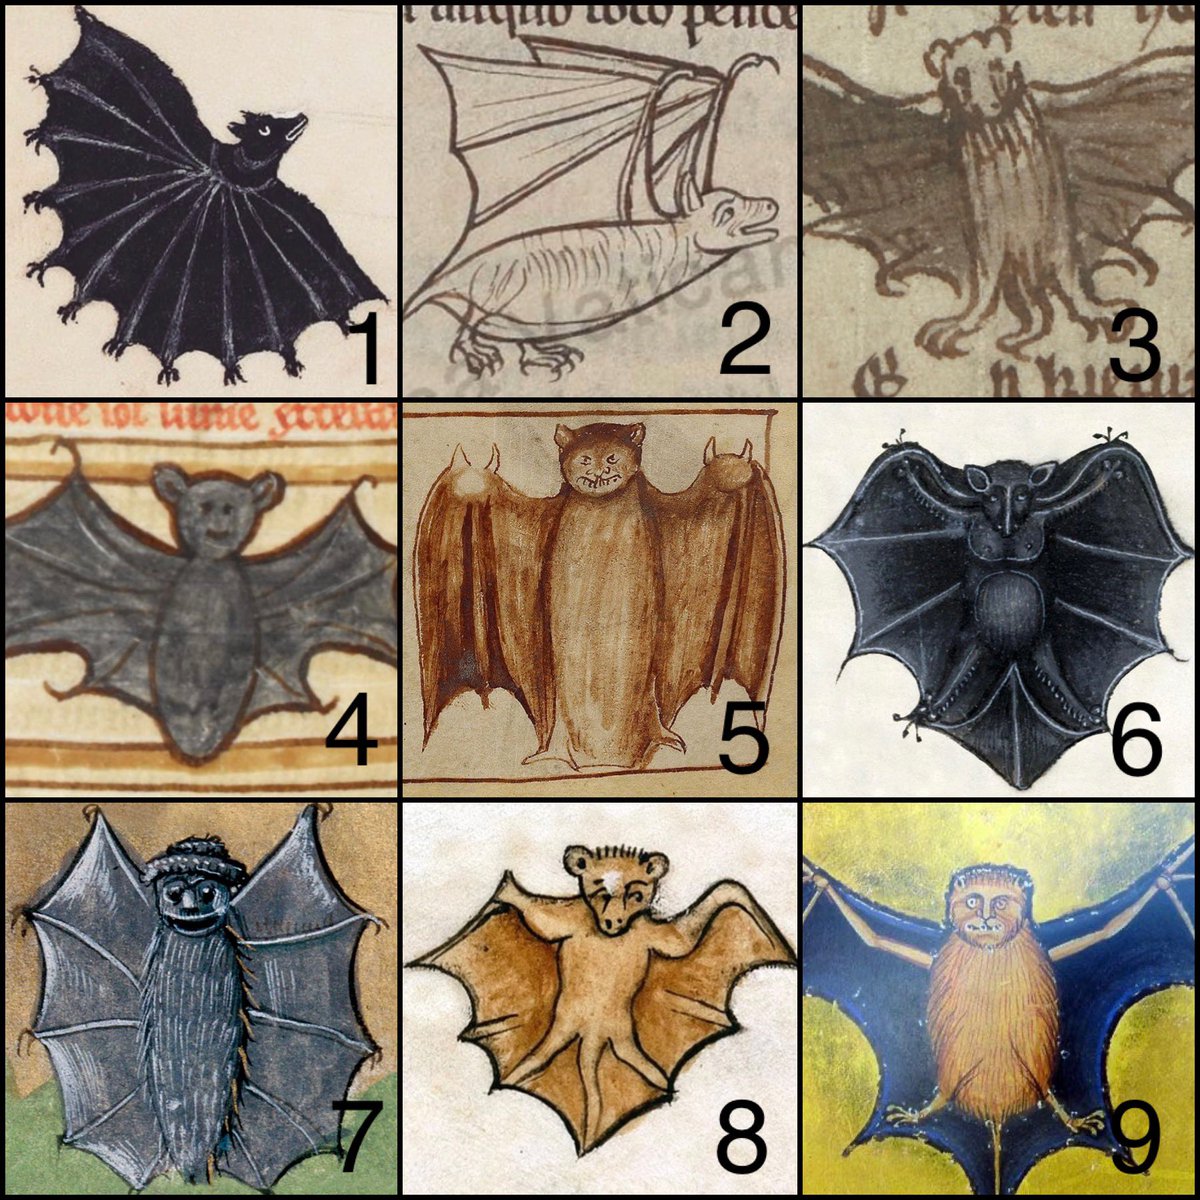 Which medieval bat are you today? 🦇